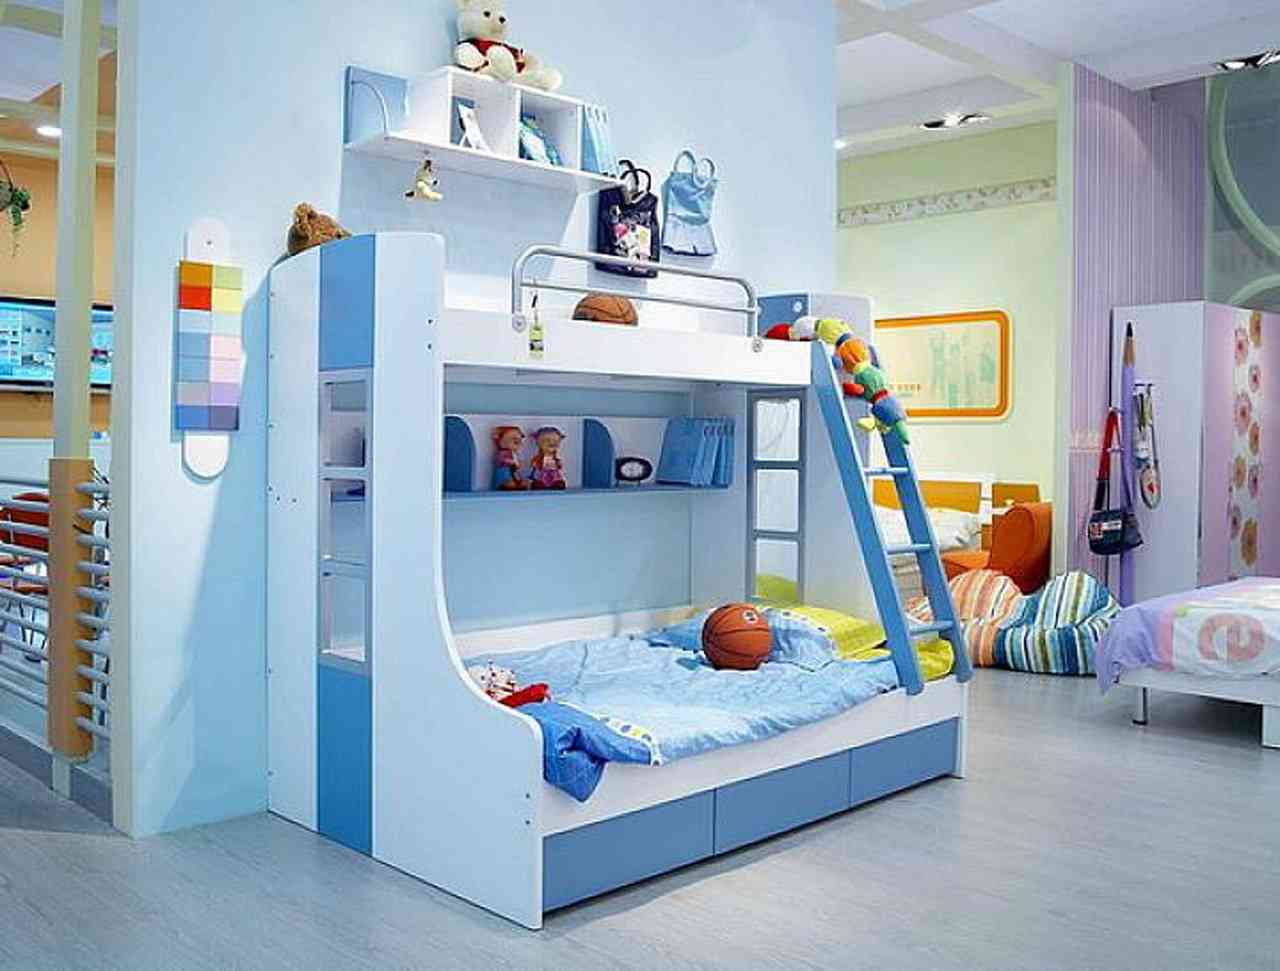 Ideas of remodell your your small home design with cool amazing kid bedroom  furniture kids bedroom furniture sets for boys